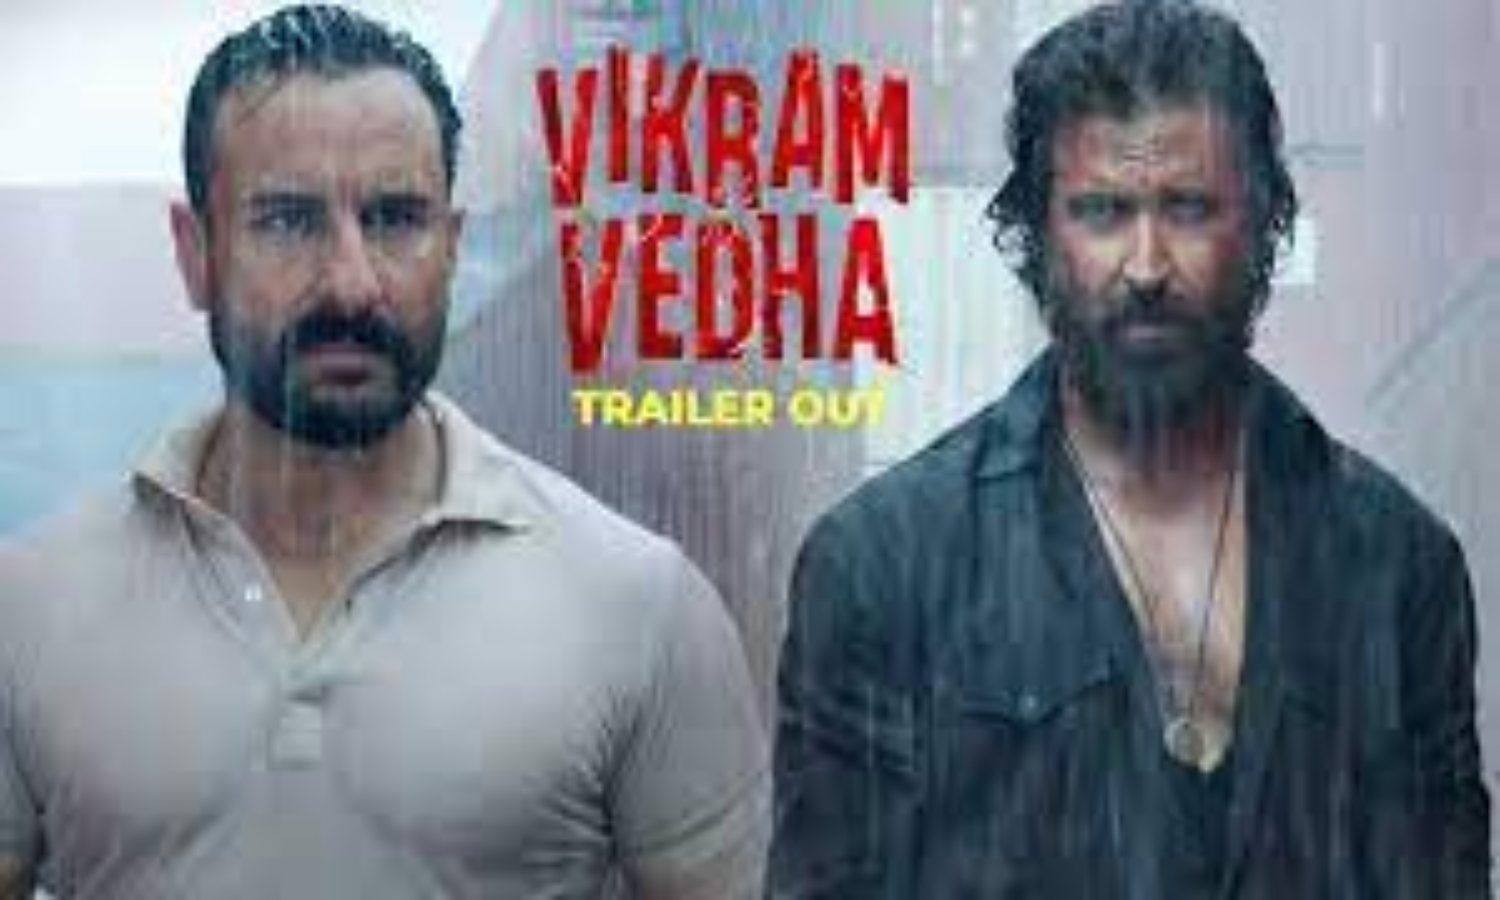 Vikram Vedha Trailer OUT: Trailer out of Hrithik Roshan and Saif Ali Khan’s film will be full of thriller and action